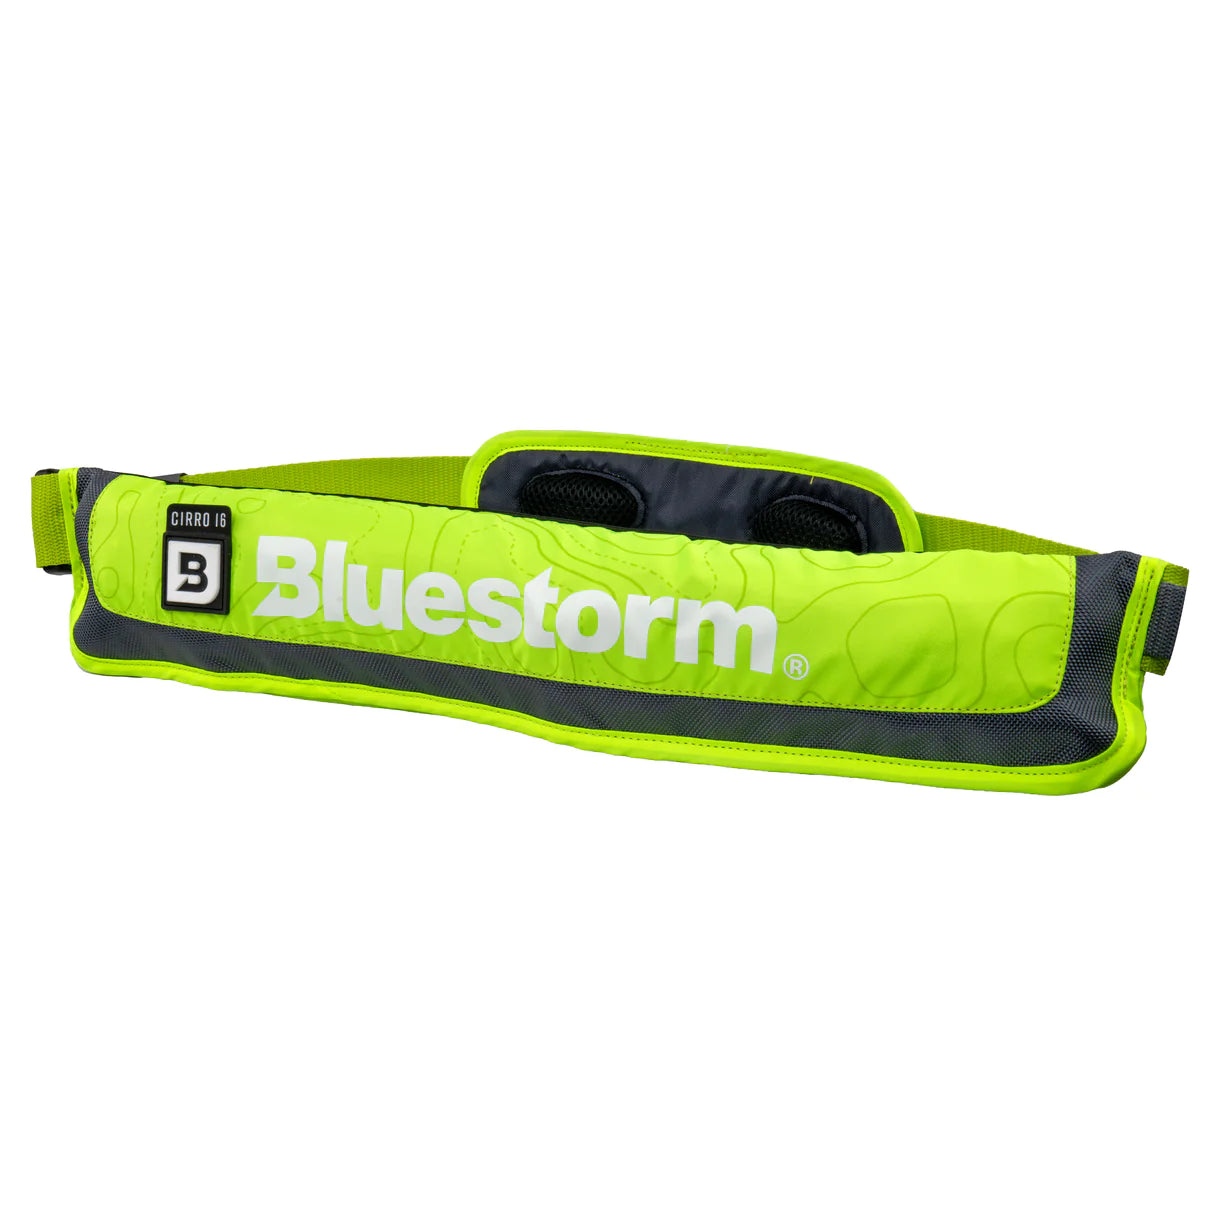 Bluestorm Cirro 16 Manual Inflatable - – Dog Products USCG Jacket Mad Approved Life